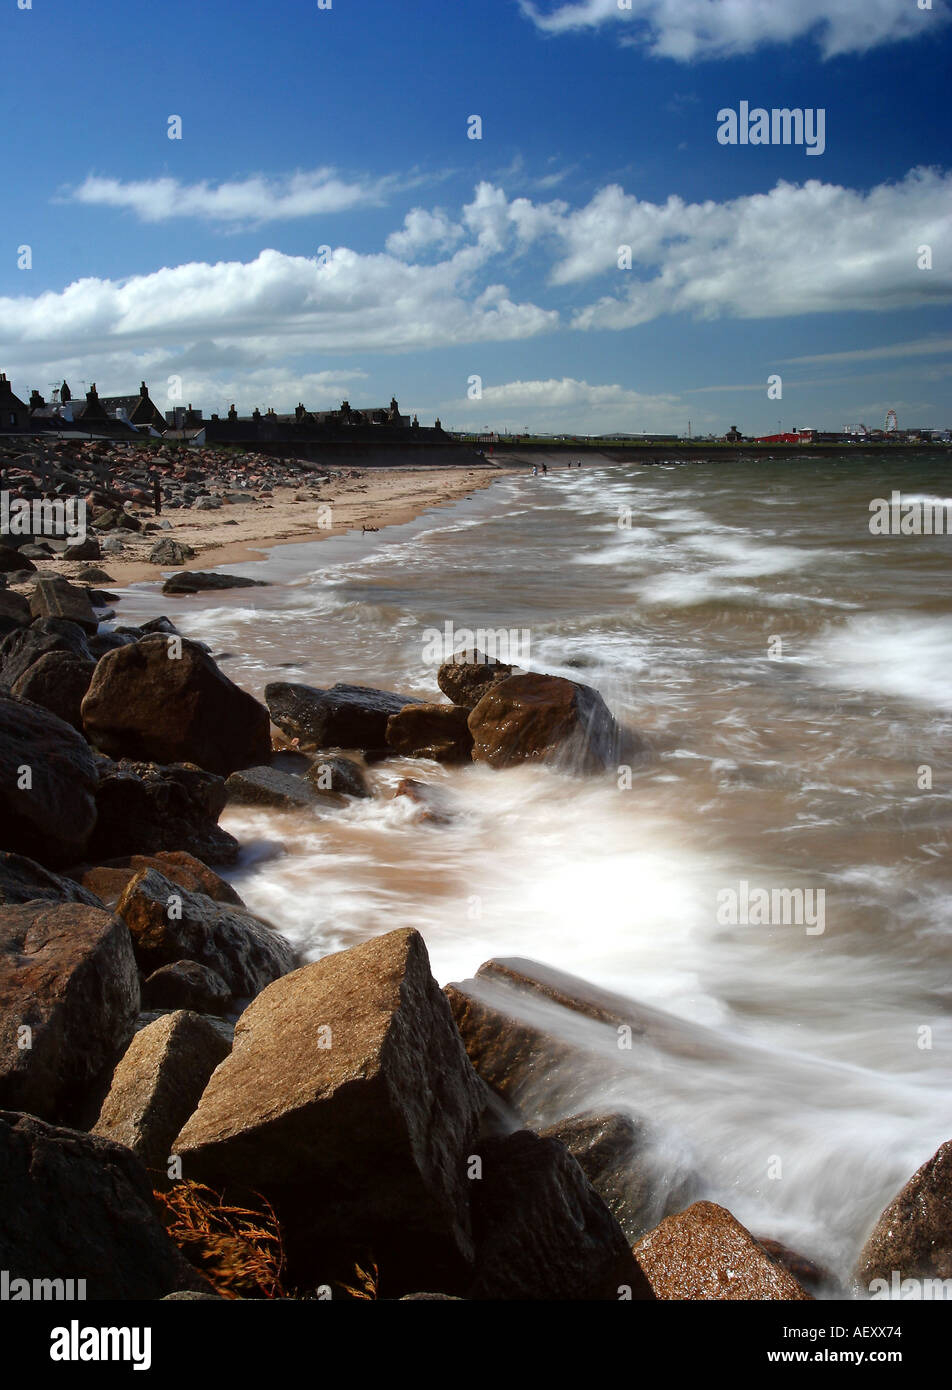 Portrait format image of Aberdeen Beach and promenade Scotland against a blue sky and rocky foreground Stock Photo